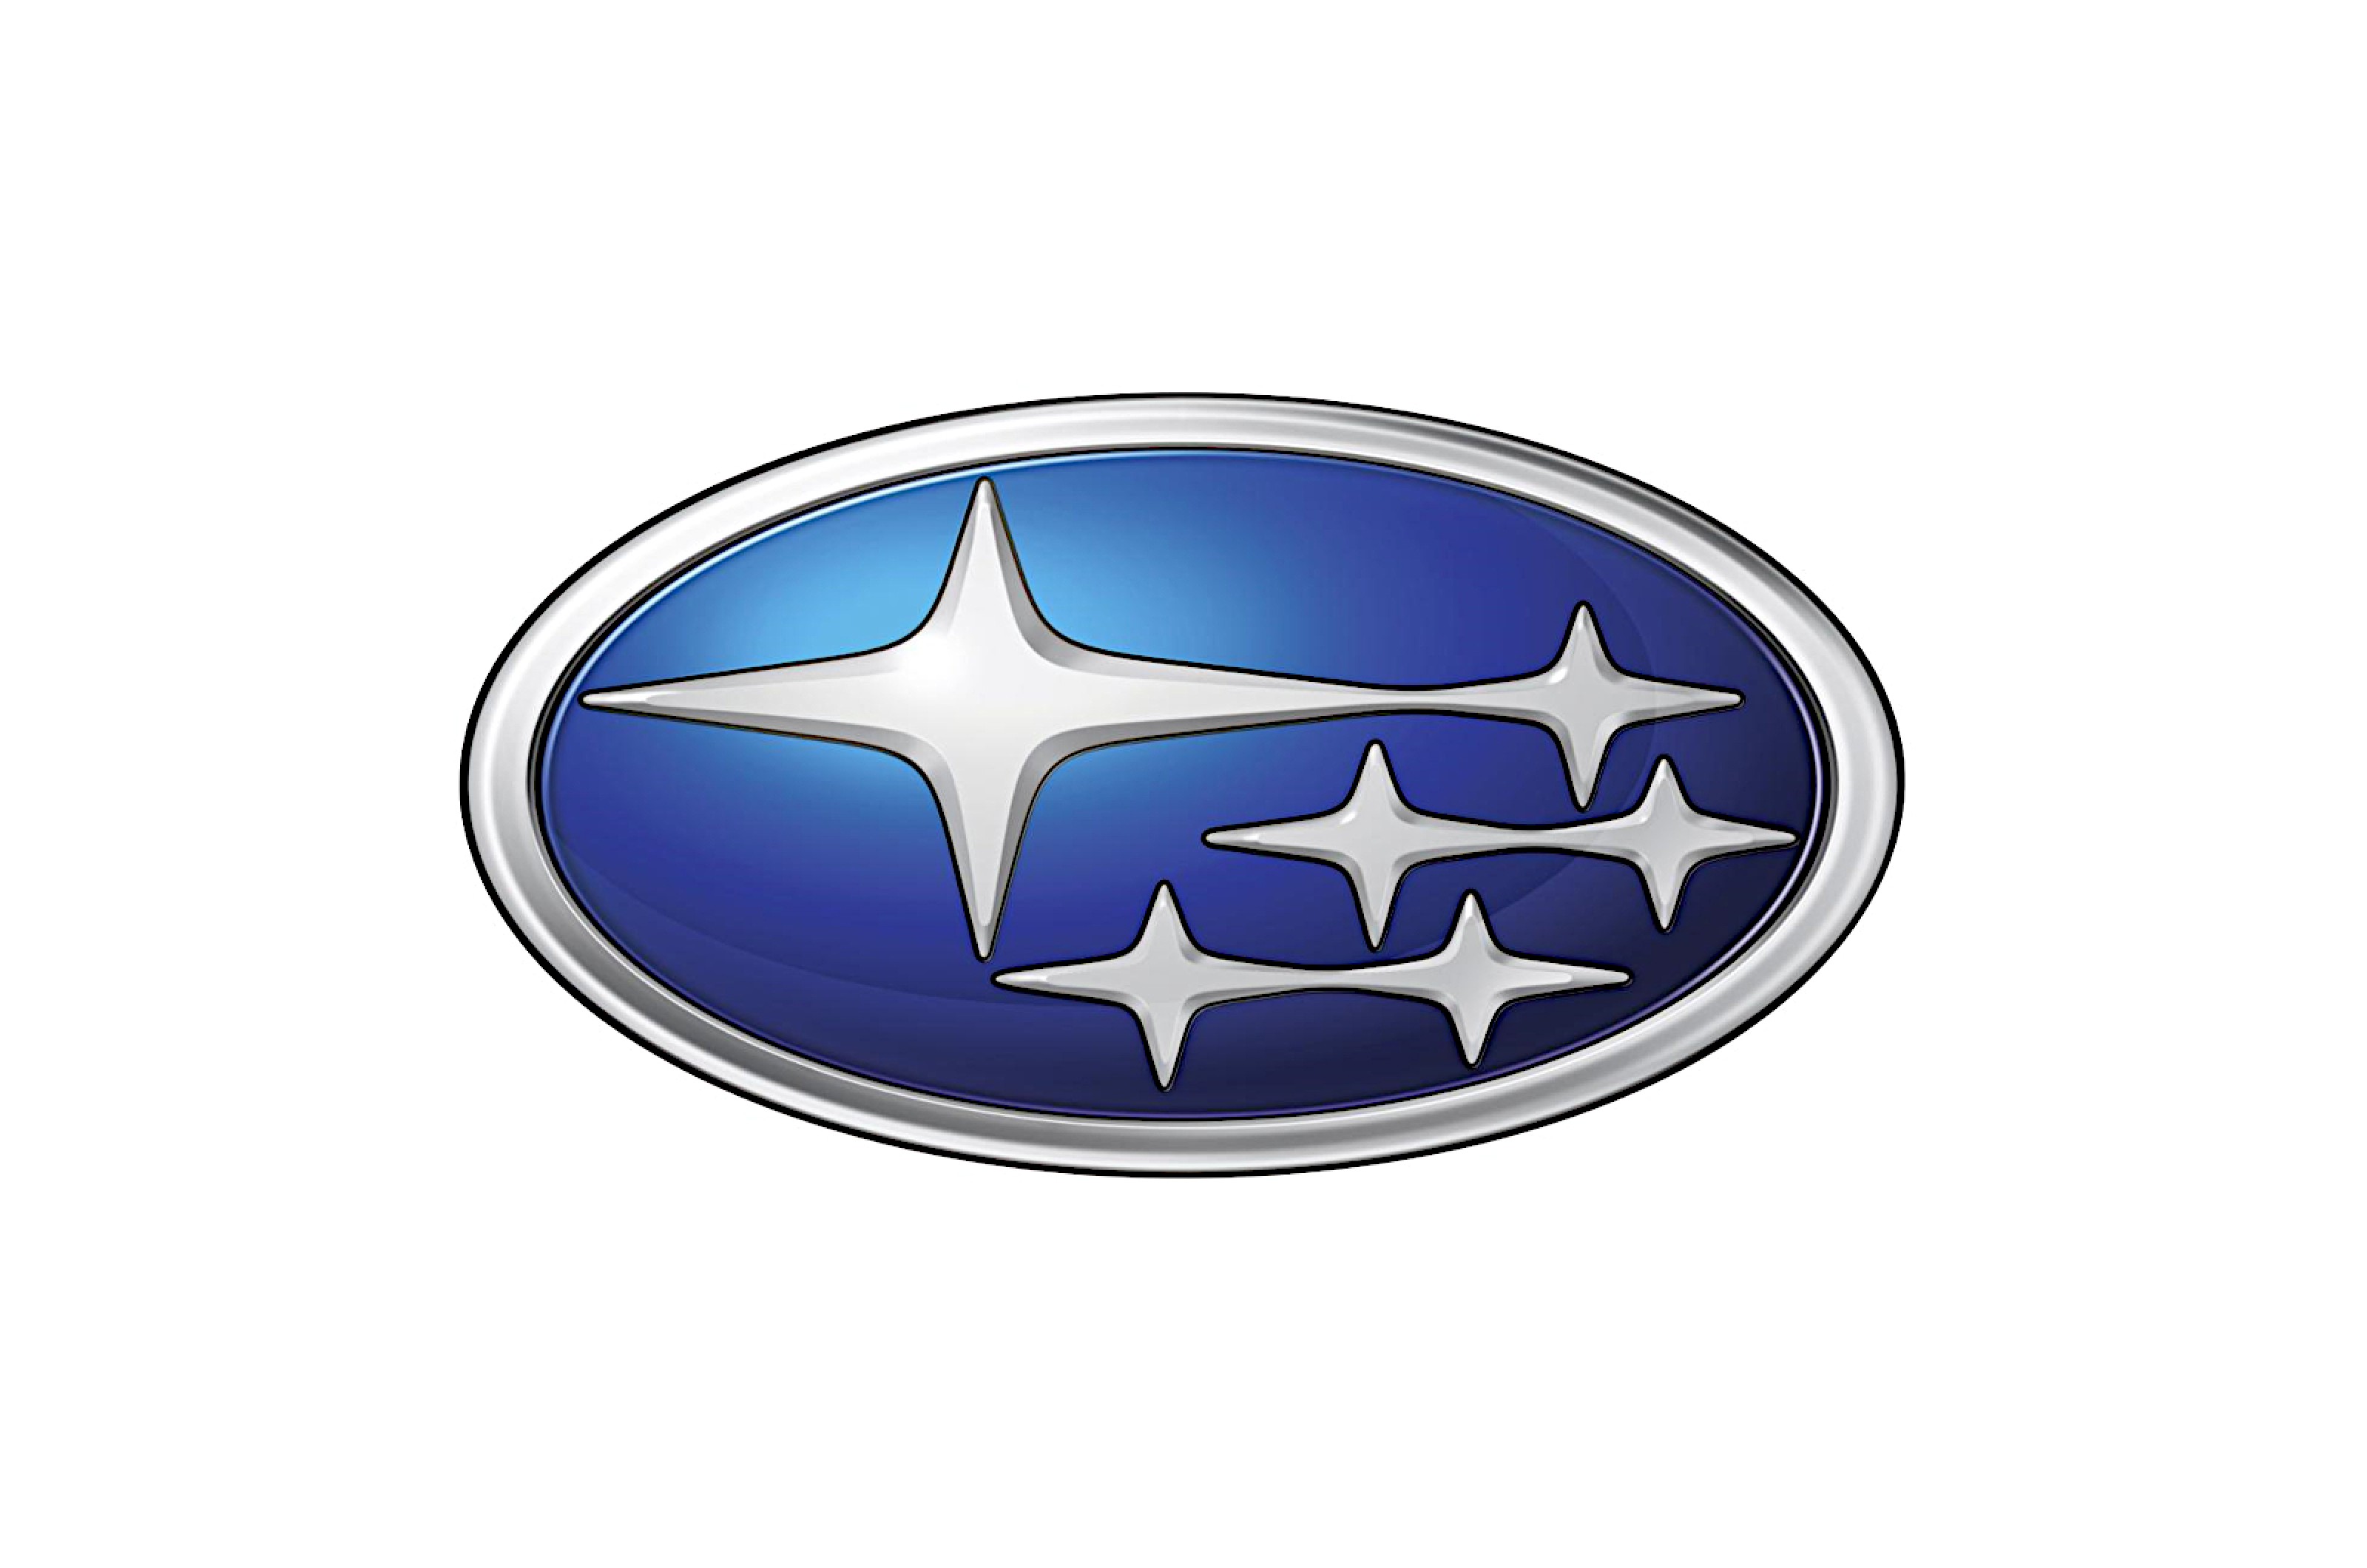 <p>Fuji Heavy Industries was created in the early 1950s as an amalgamation of five Japanese companies.</p>  <p>This influenced both the name and the logo of its car brand. The earlier companies and the one they became were represented by the six stars visible with the naked eye from Earth of the Pleiades cluster, which is known in Japan as Subaru.</p>  <p>The relative positions of the stars in the logo, along with its color, have changed over the years, but they have always been there, mounted within (or in some cases on the edge of) an oval.</p>  <p>FHI took on the Subaru logo for all its operations in 2003, and was renamed Subaru Corporation in 2017.</p>